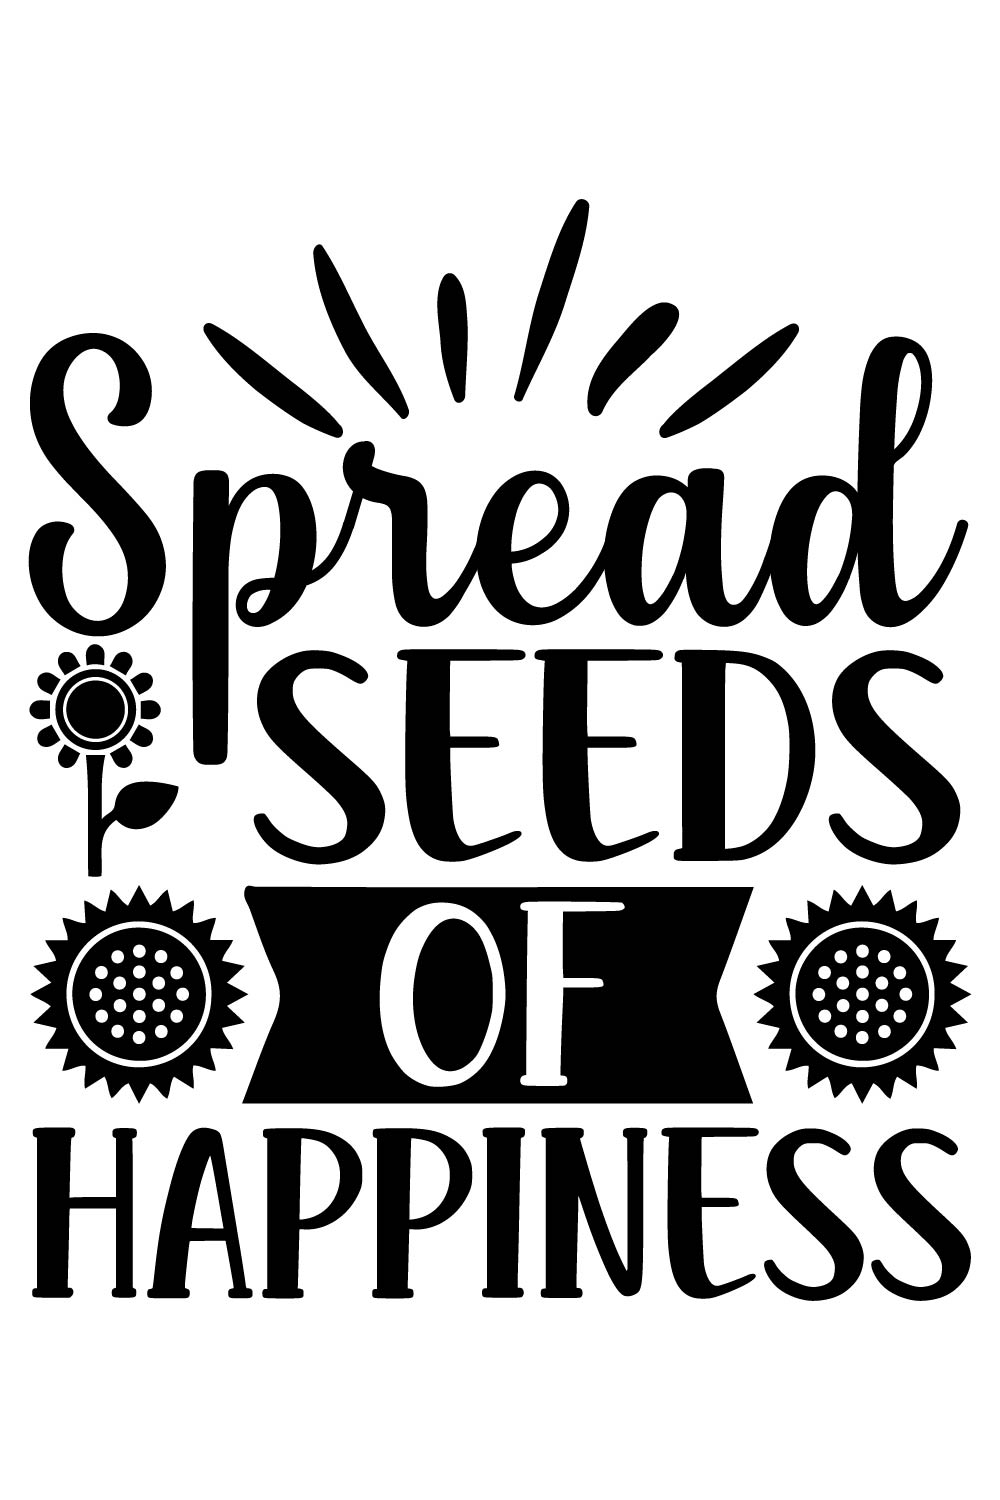 Image with a wonderful inscription for prints Spread seeds of happiness.